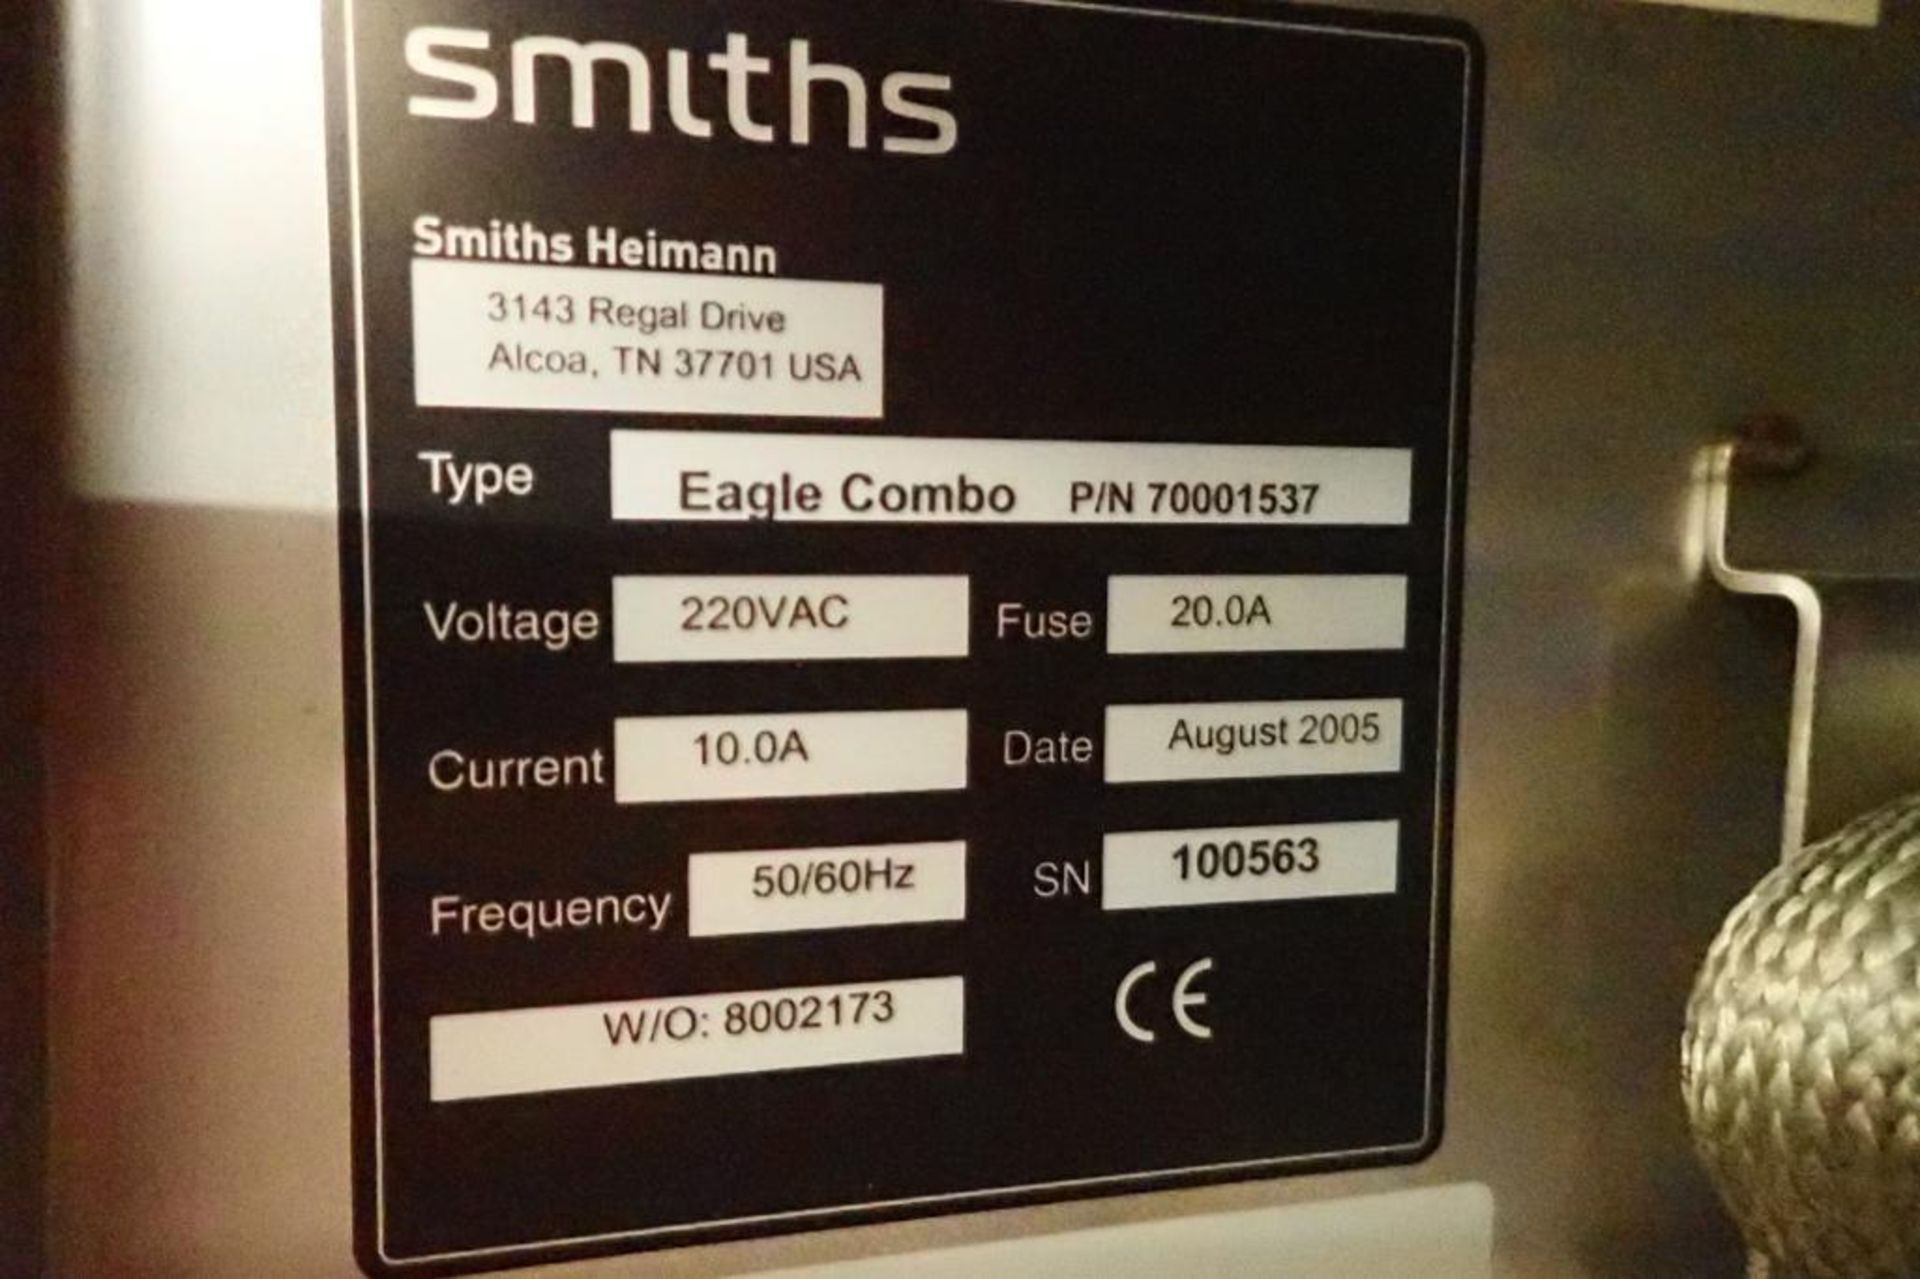 2005 Smiths eagle combo x-ray machine {Located in Indianapolis, IN} - Image 9 of 11